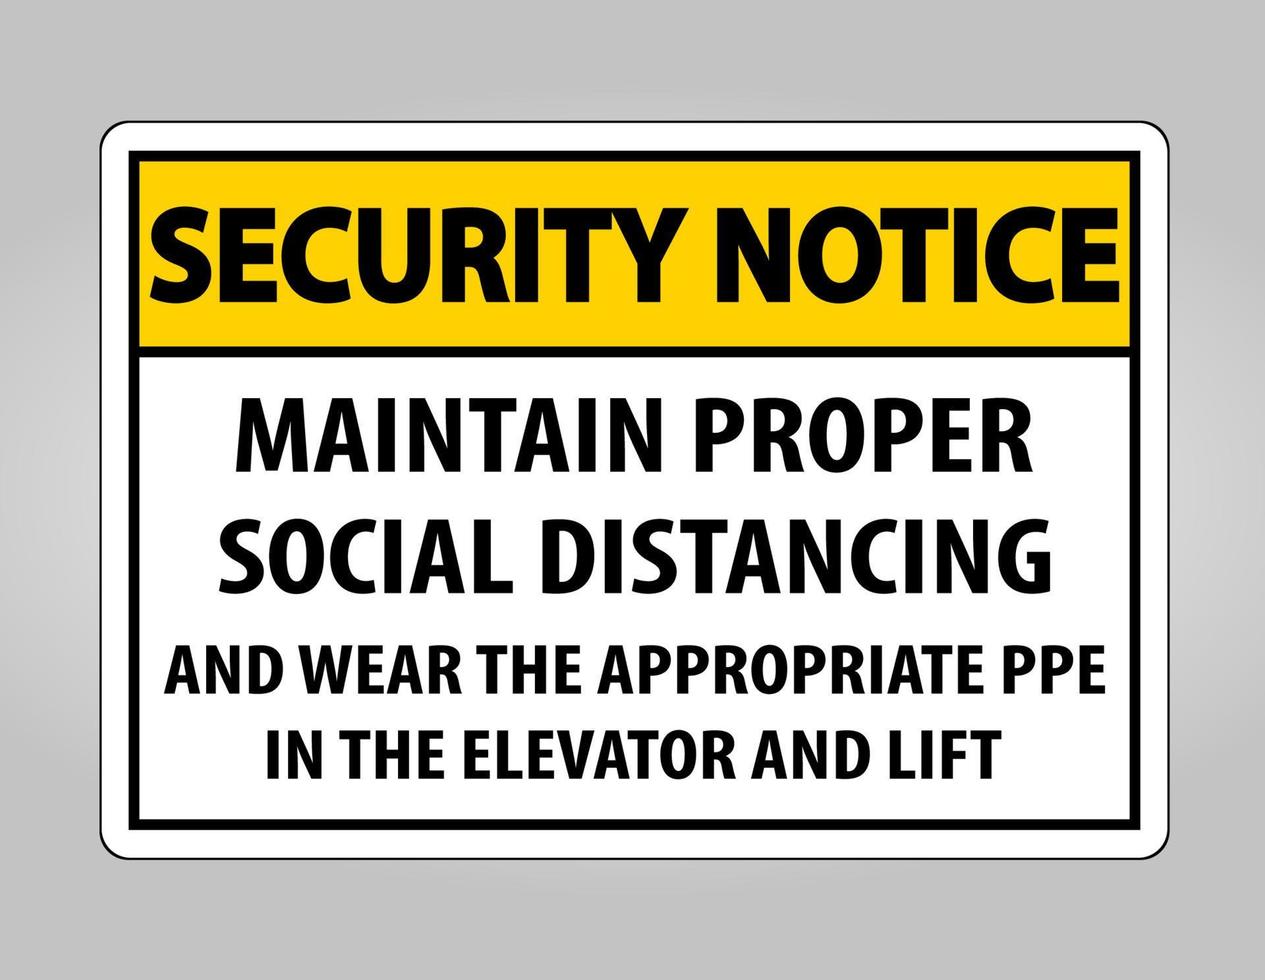 Security Notice Maintain Proper Social Distancing Sign Isolate On White Background,Vector Illustration EPS.10 vector